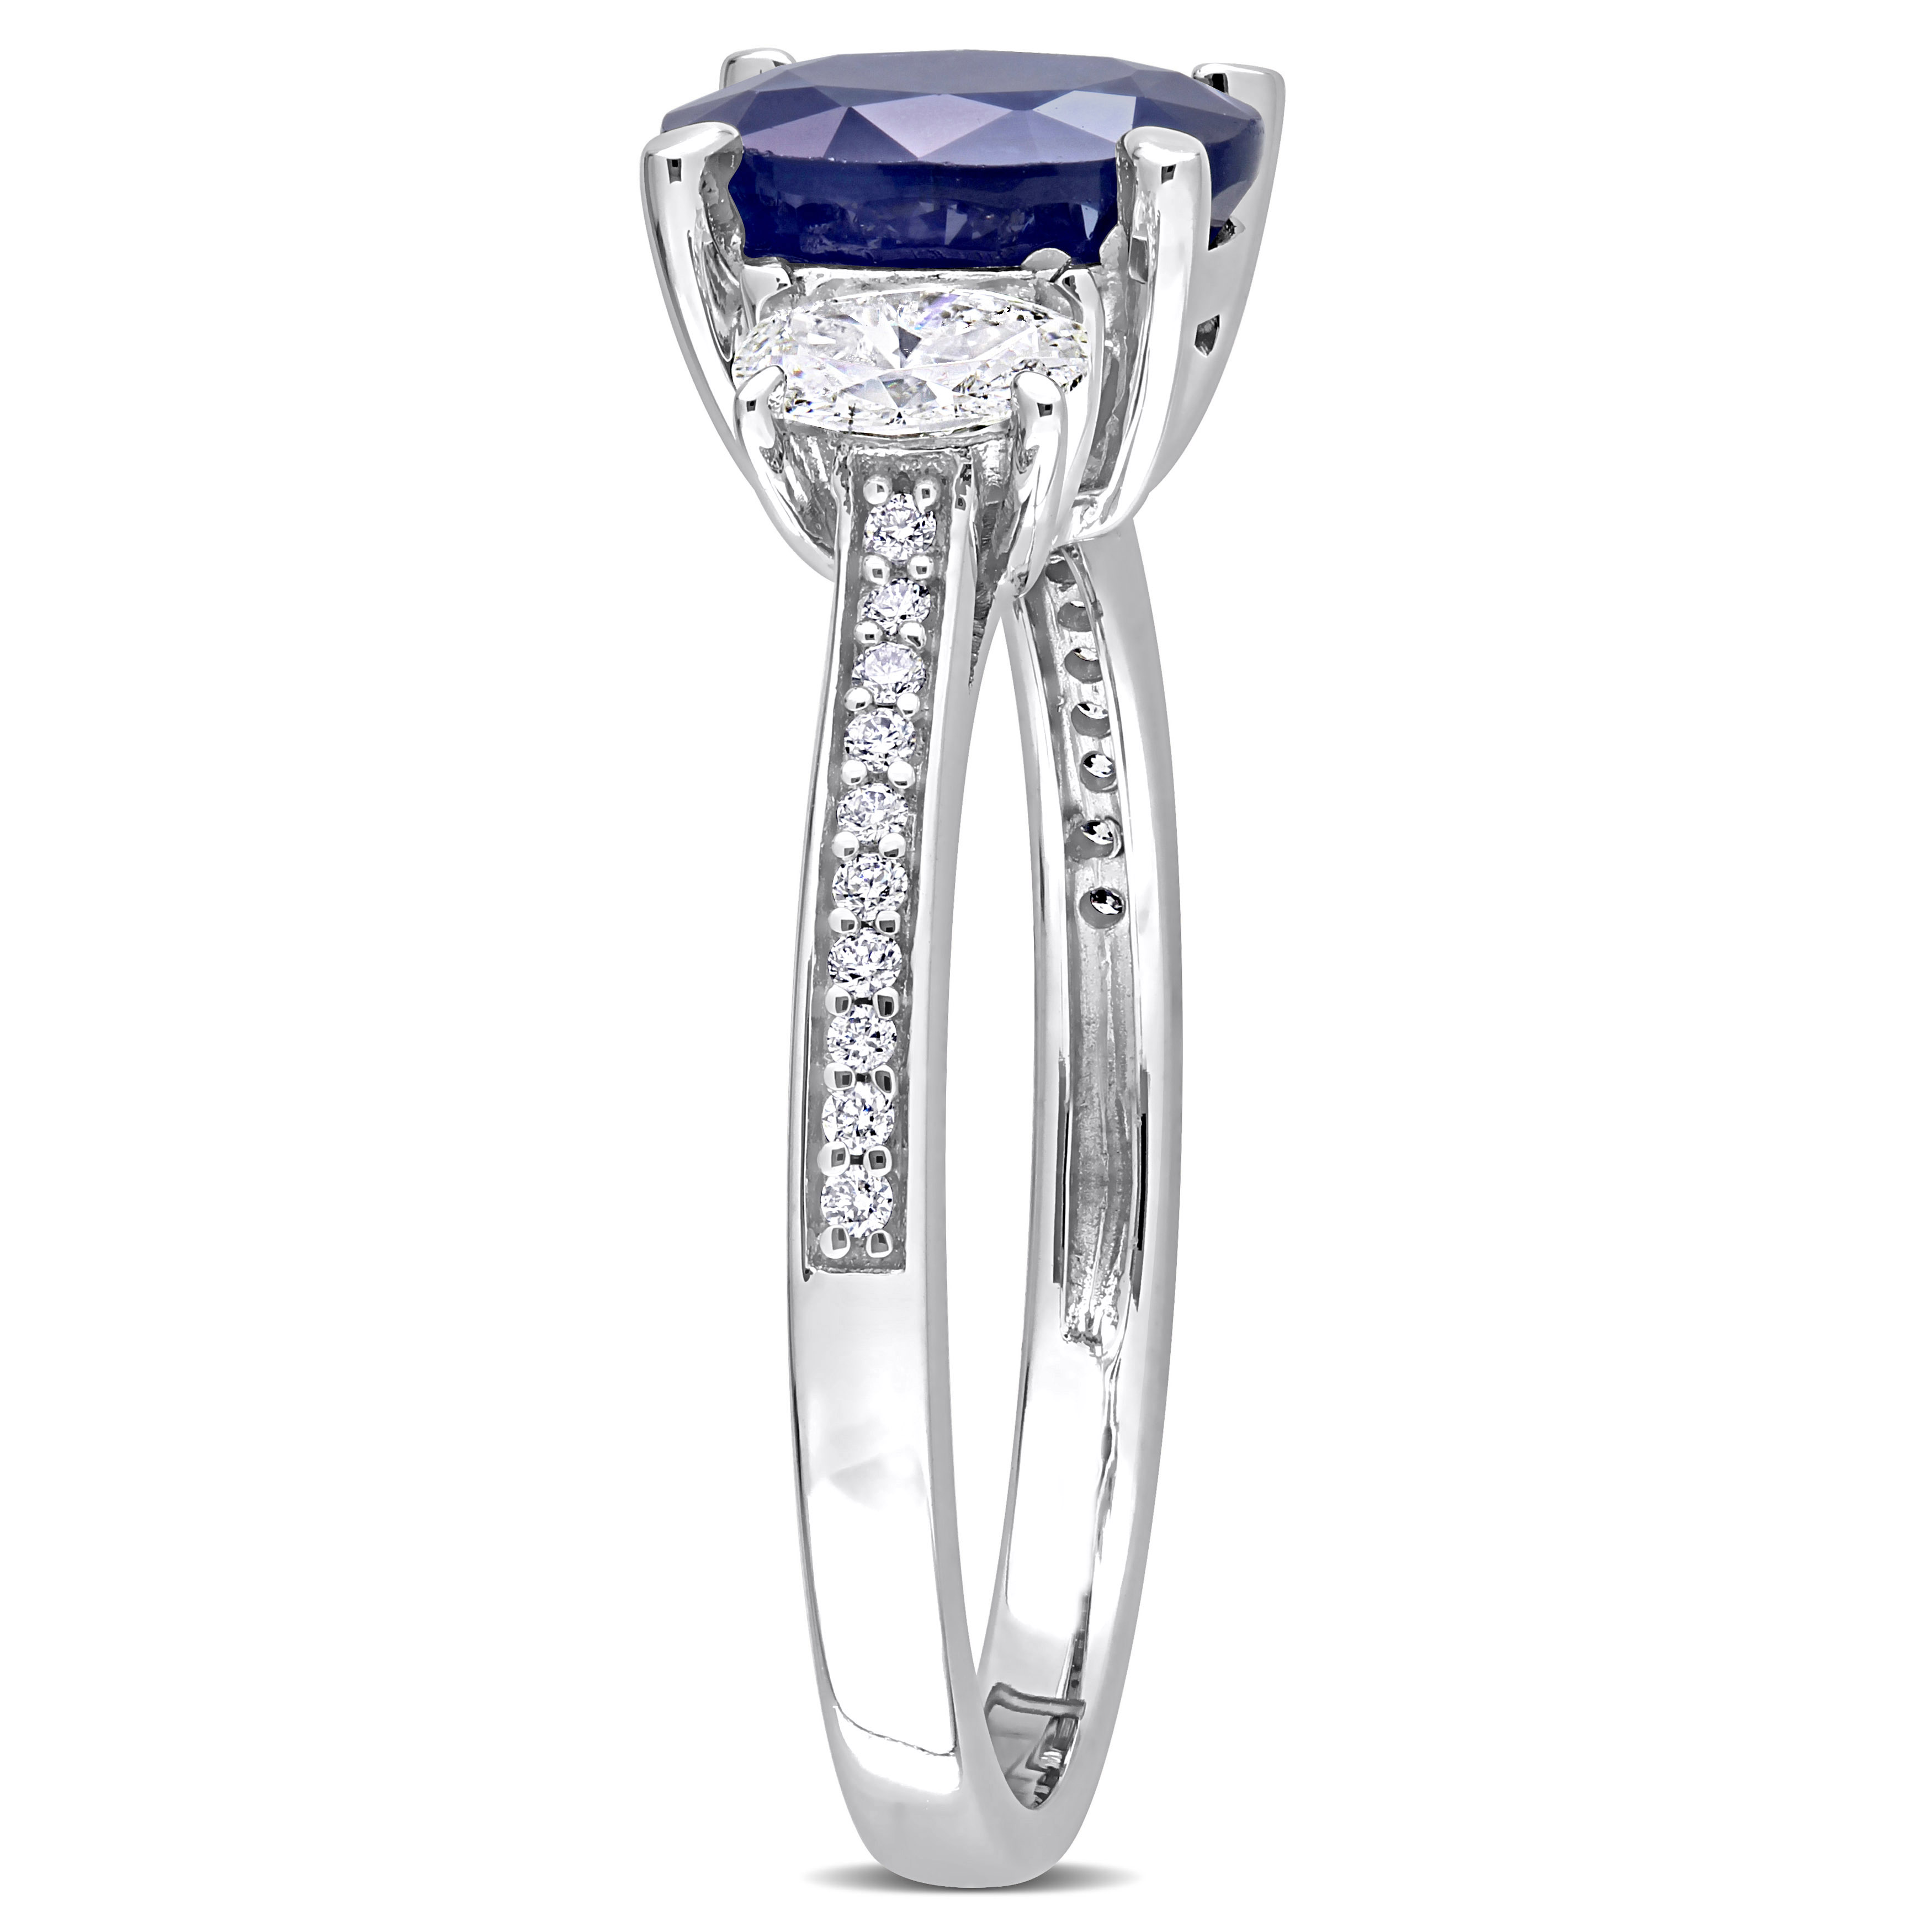 2 1/2 CT TGW Oval Cut Sapphire and 5/8 CT Oval and Round Cut Diamond 3-Stone Ring in 14k White Gold